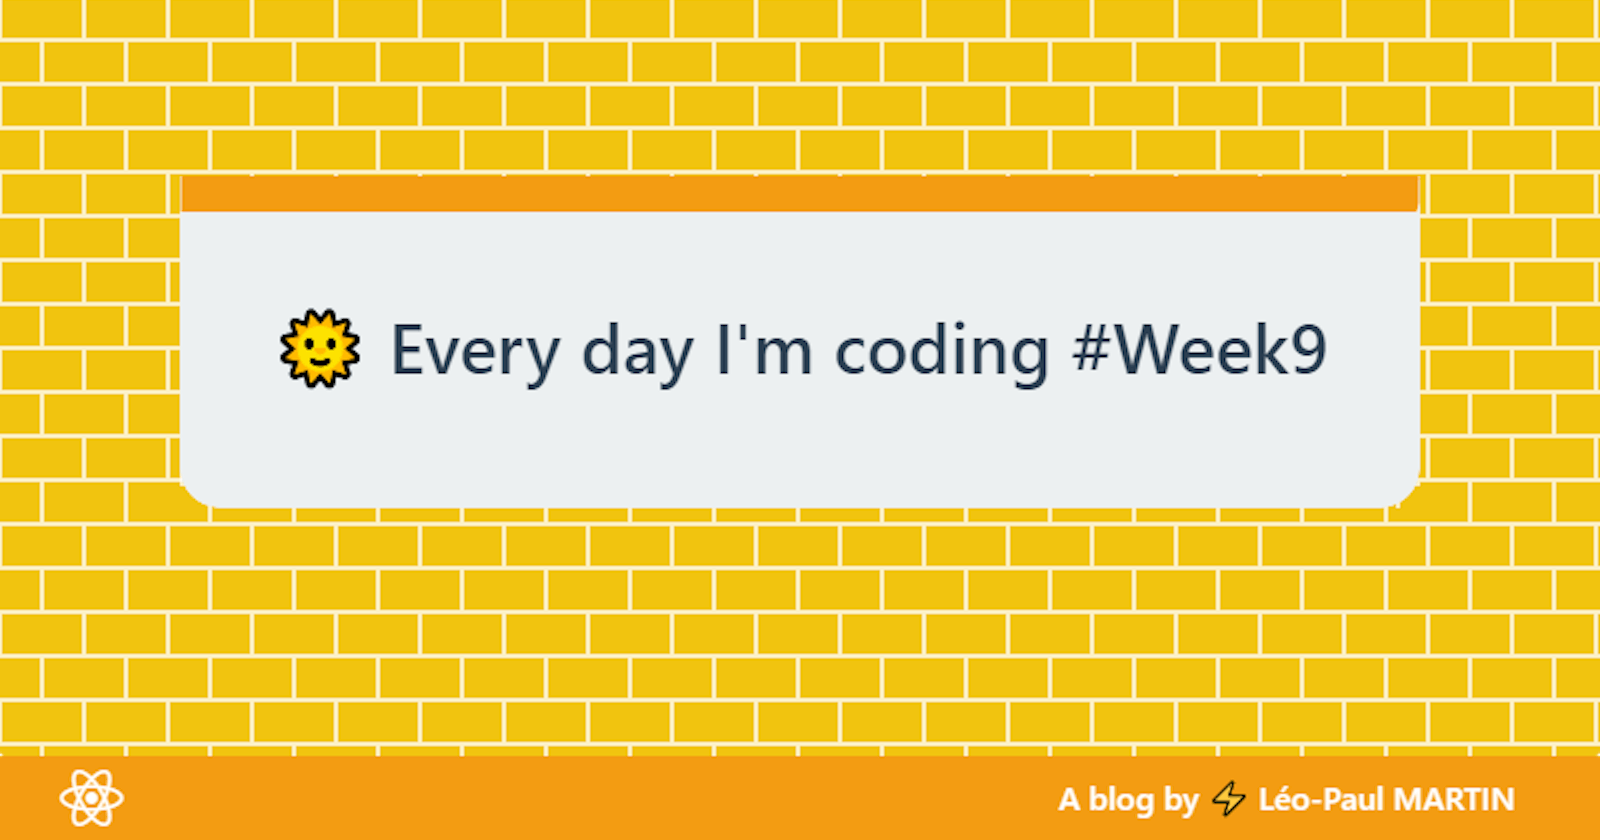 🌞 Every day I'm coding #Week9